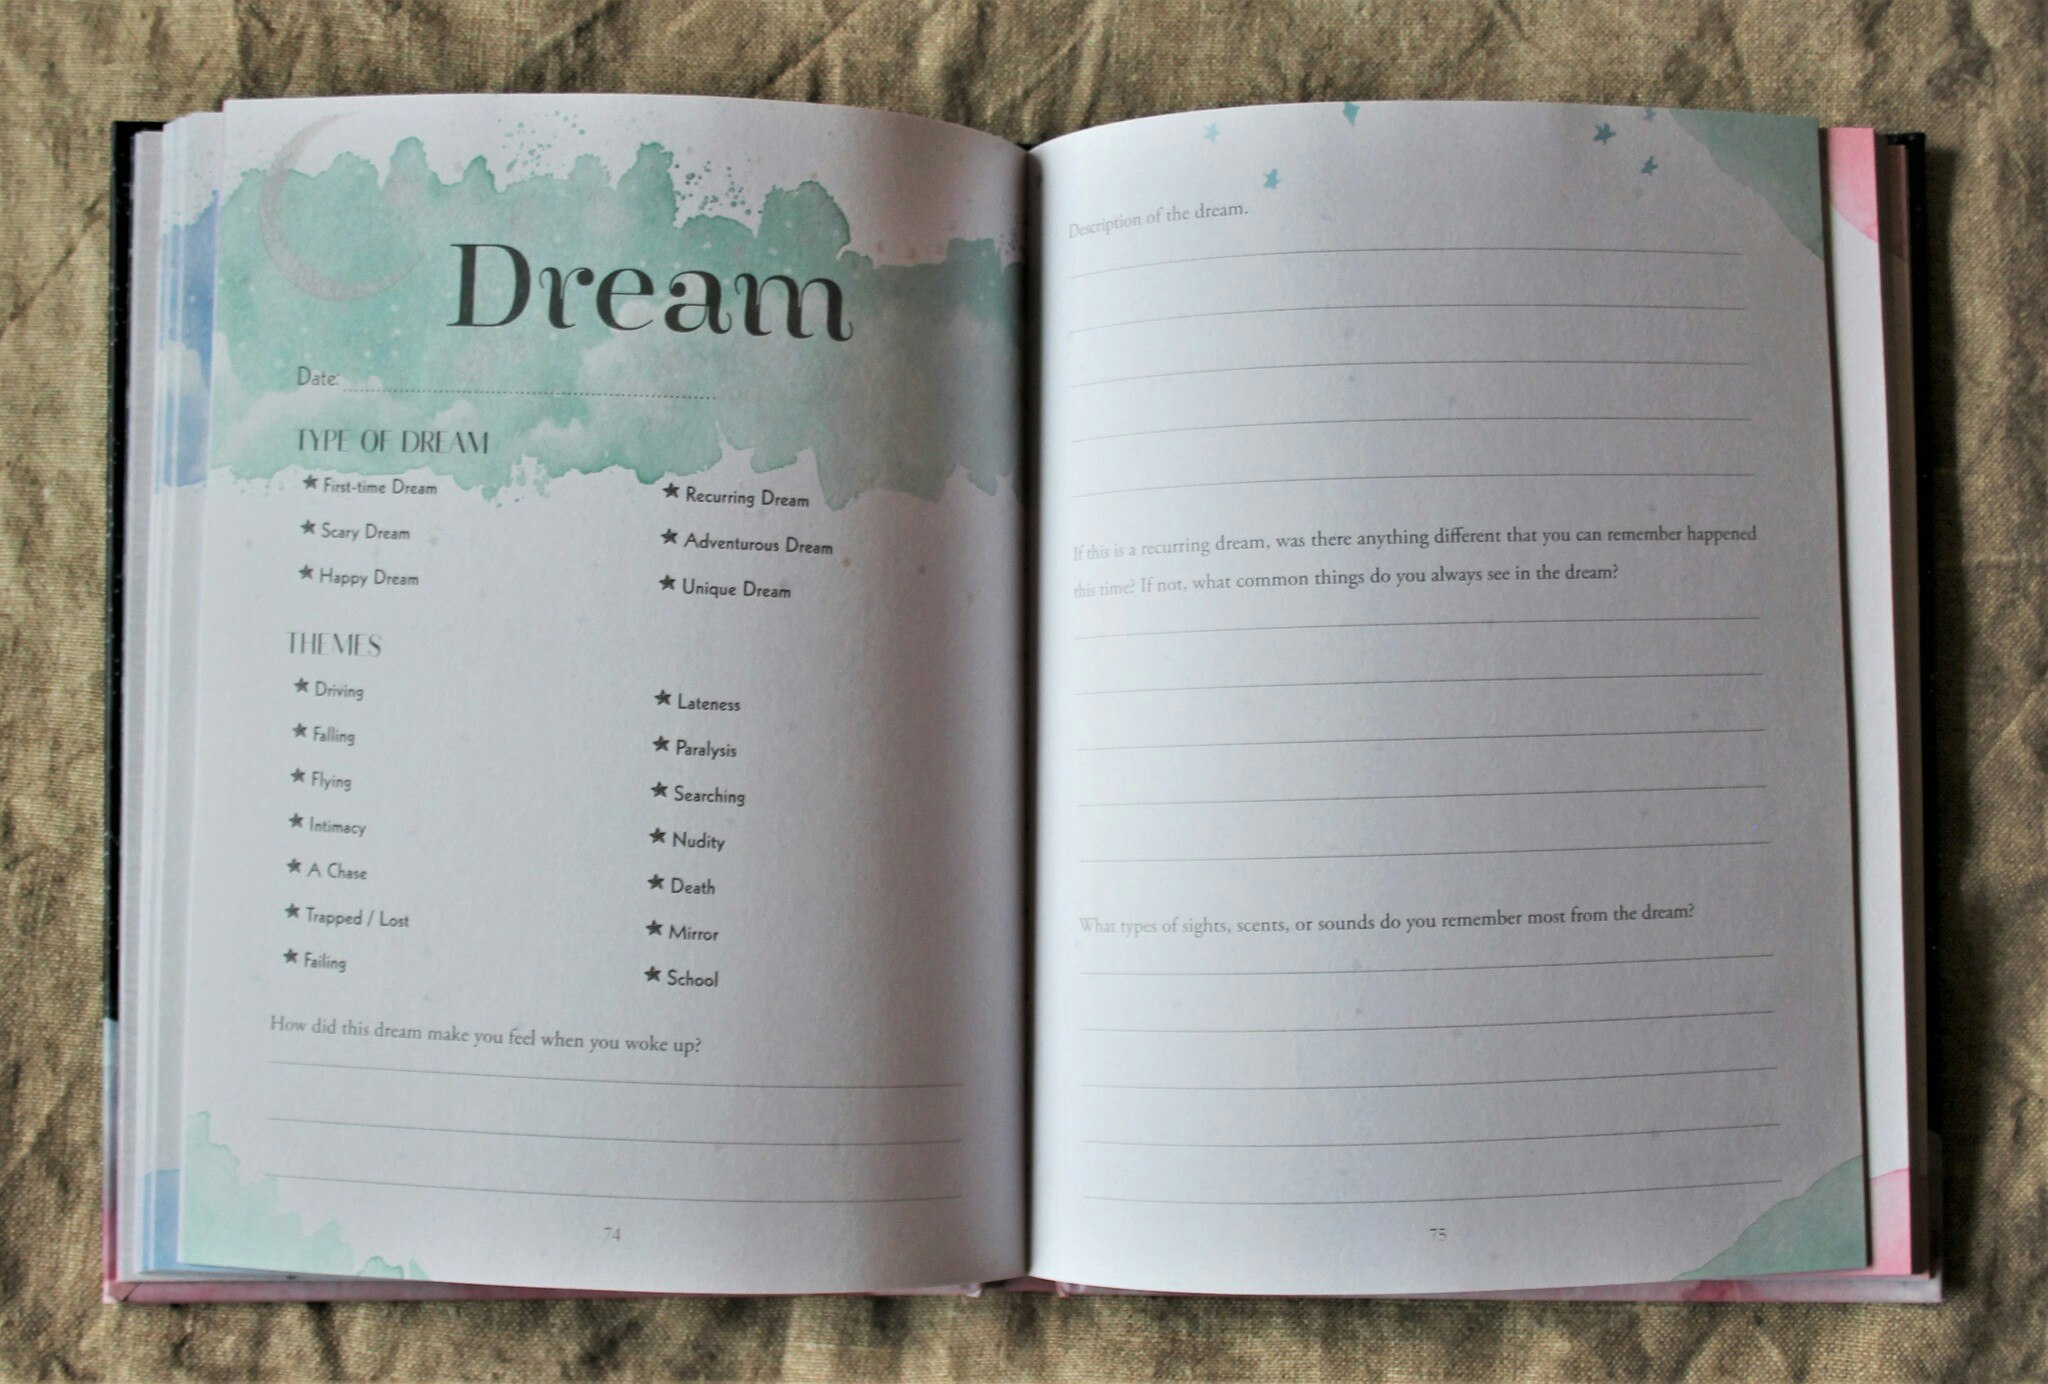 THE ESSENTIAL DREAM JOURNAL